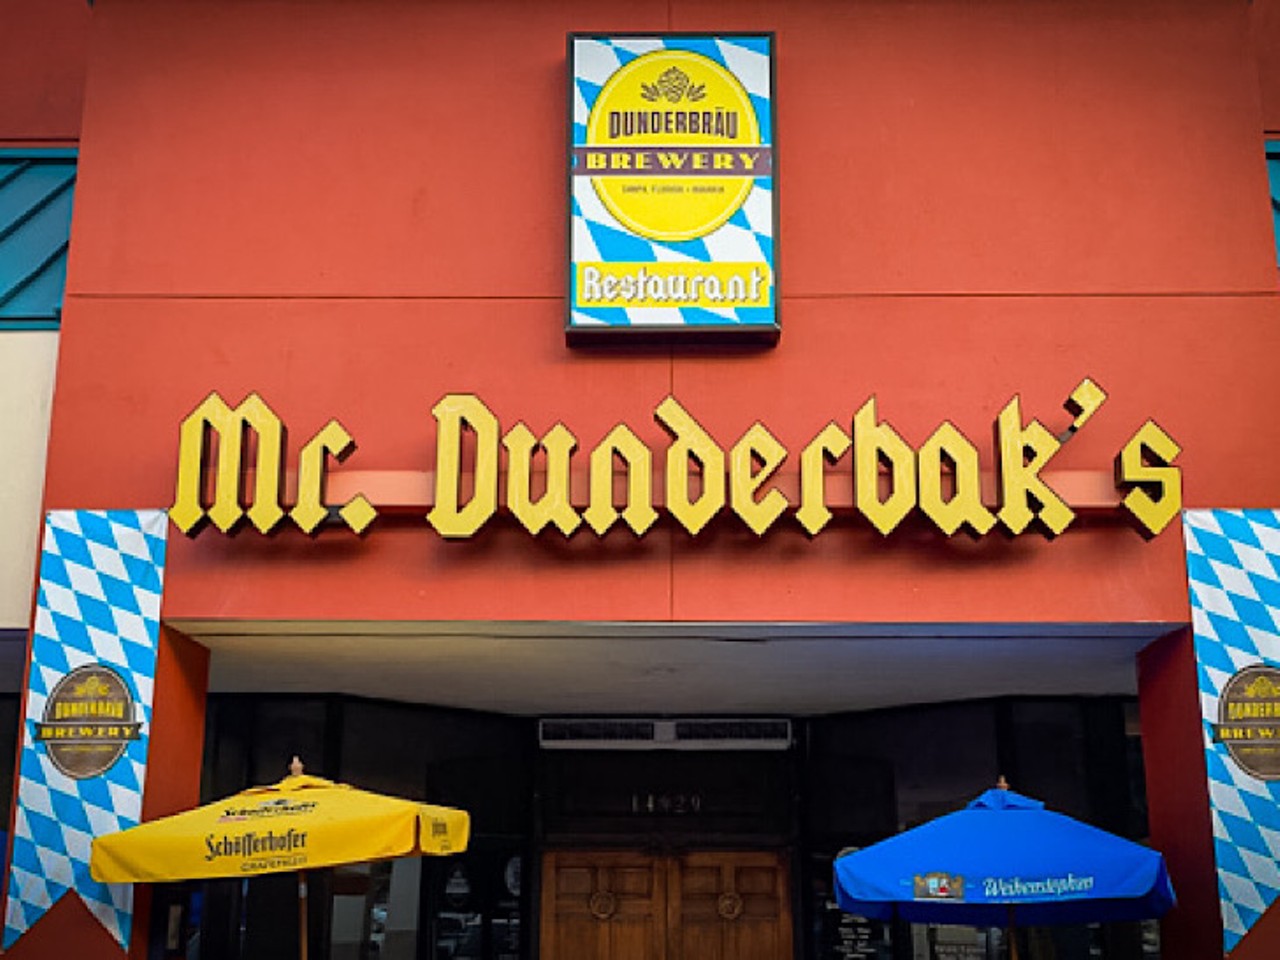 Mr. Dunderbak&#146;s
14929 Bruce B Downs Blvd, Tampa, FL
Mostly known for German brews, grub, and polka music on the weekends, Mr. Dunderbak&#146;s is popular amongst college kids for the moderately priced brews, and their food is pretty good. Their menu features schnitzel and cold potato salad, plua they load up your table with tons of different mustards. 
Photo via Mr. Dunderbak&#146;s/dunderbaks.com